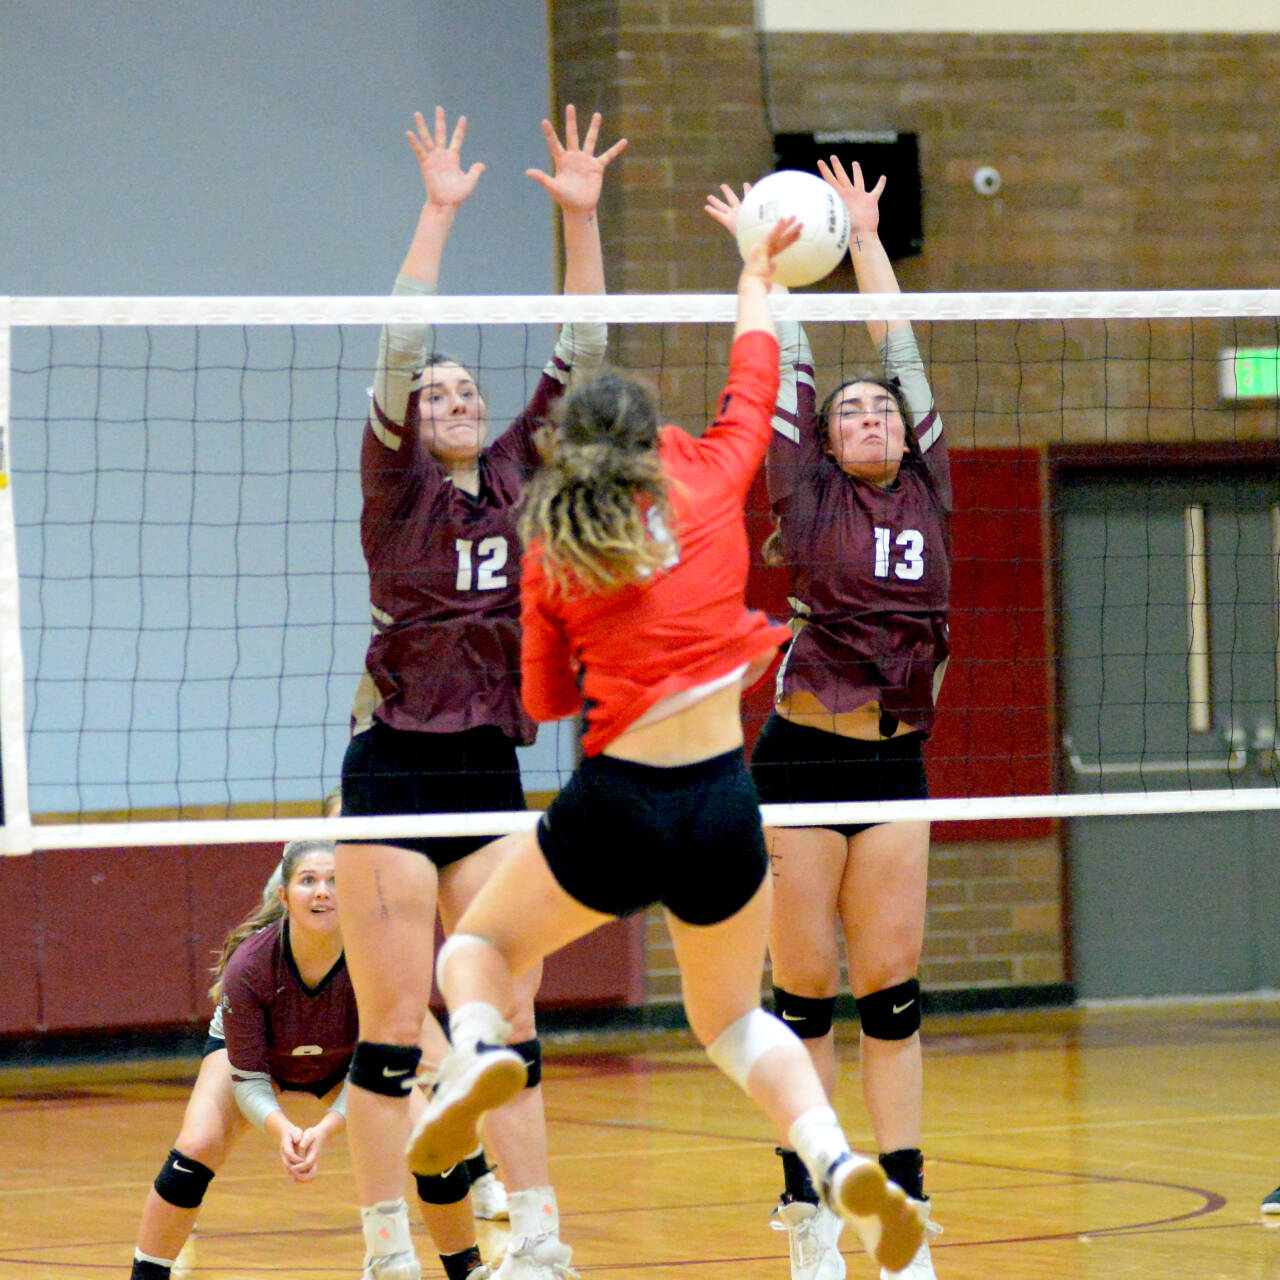 RYAN SPARKS | THE DAILY WORLD Montesano’s McKynnlie Dalan (12) and Addie Winter (13) attempt to block the shot of King’s Way Christian’s Ellie Mathison during a five-set loss in the 1A District 4 Tournament on Wednesday in Montesano.